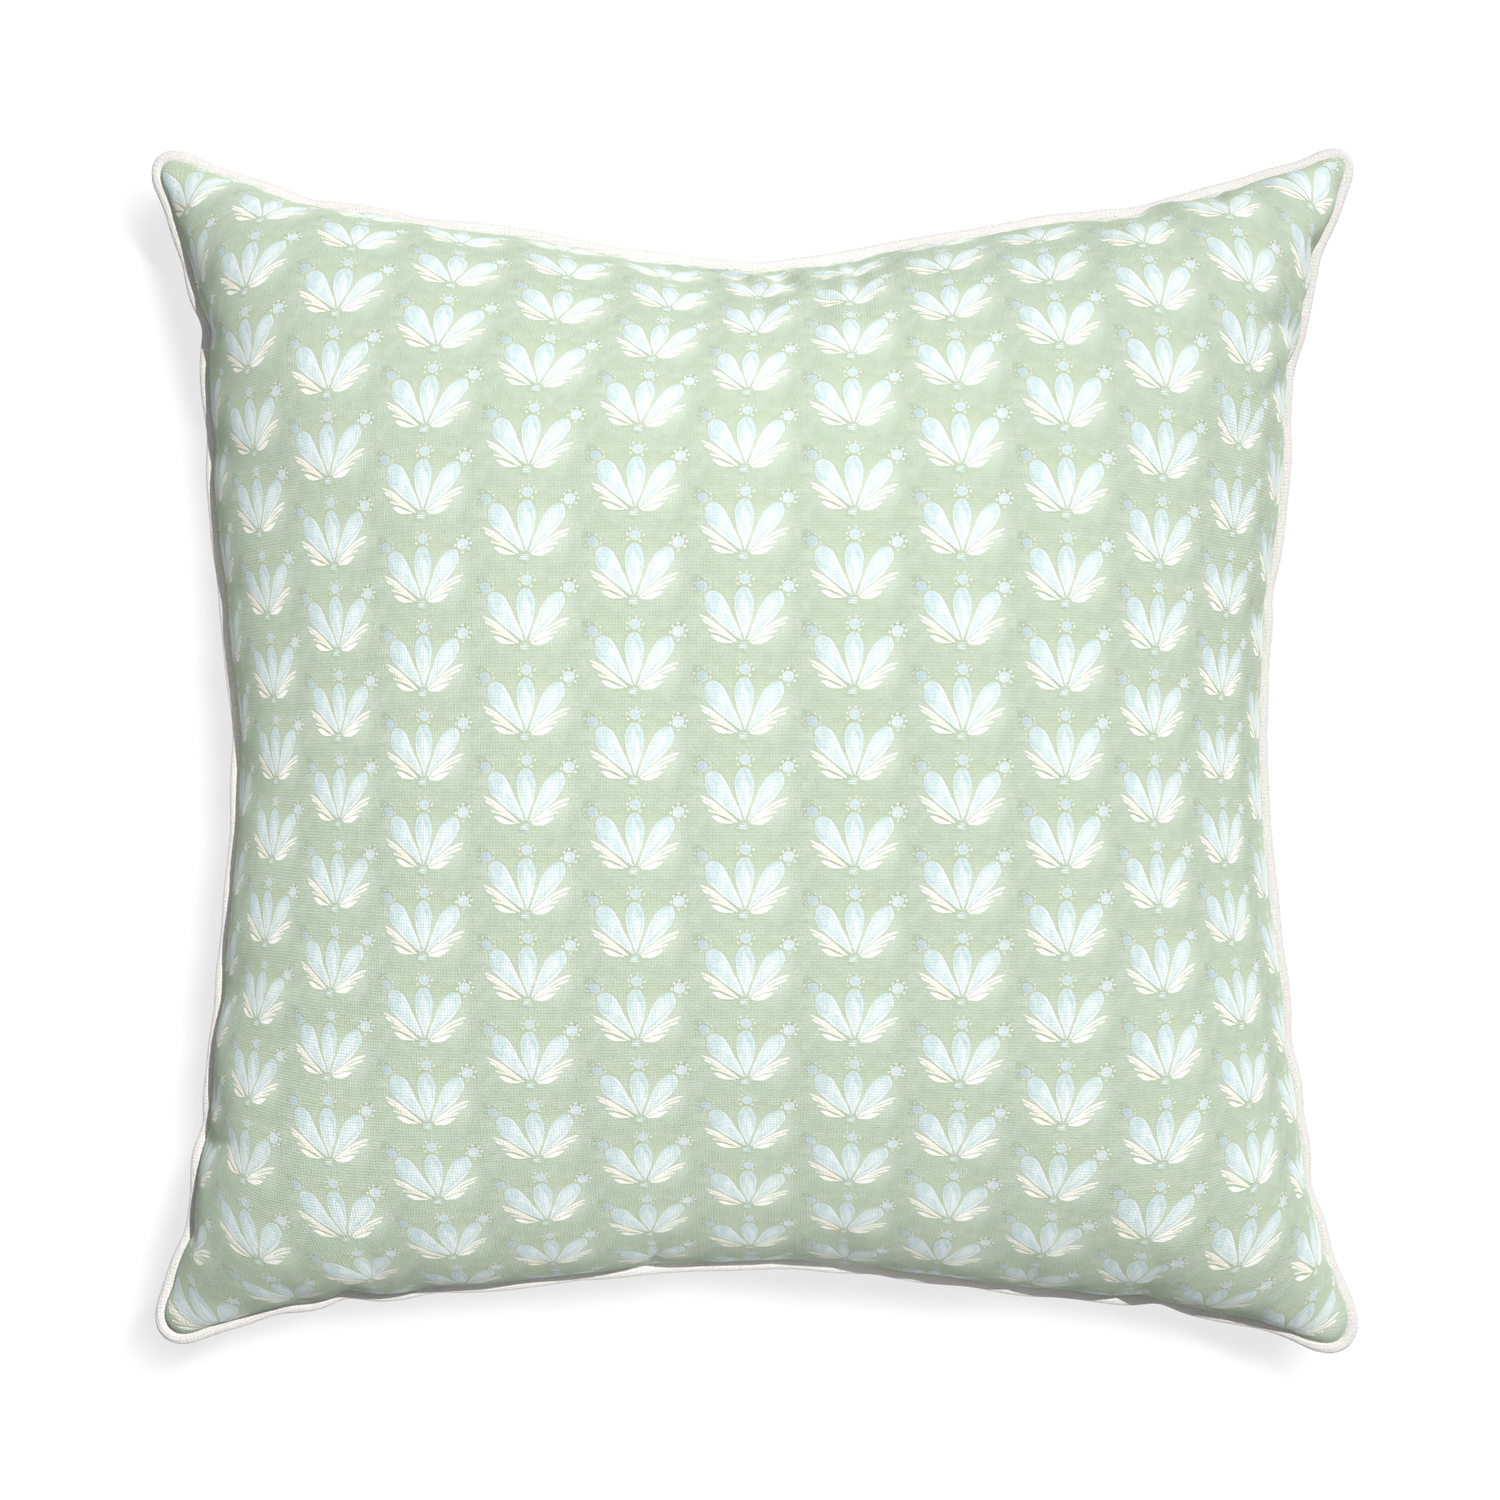 Euro-sham serena sea salt custom blue & green floral drop repeatpillow with snow piping on white background